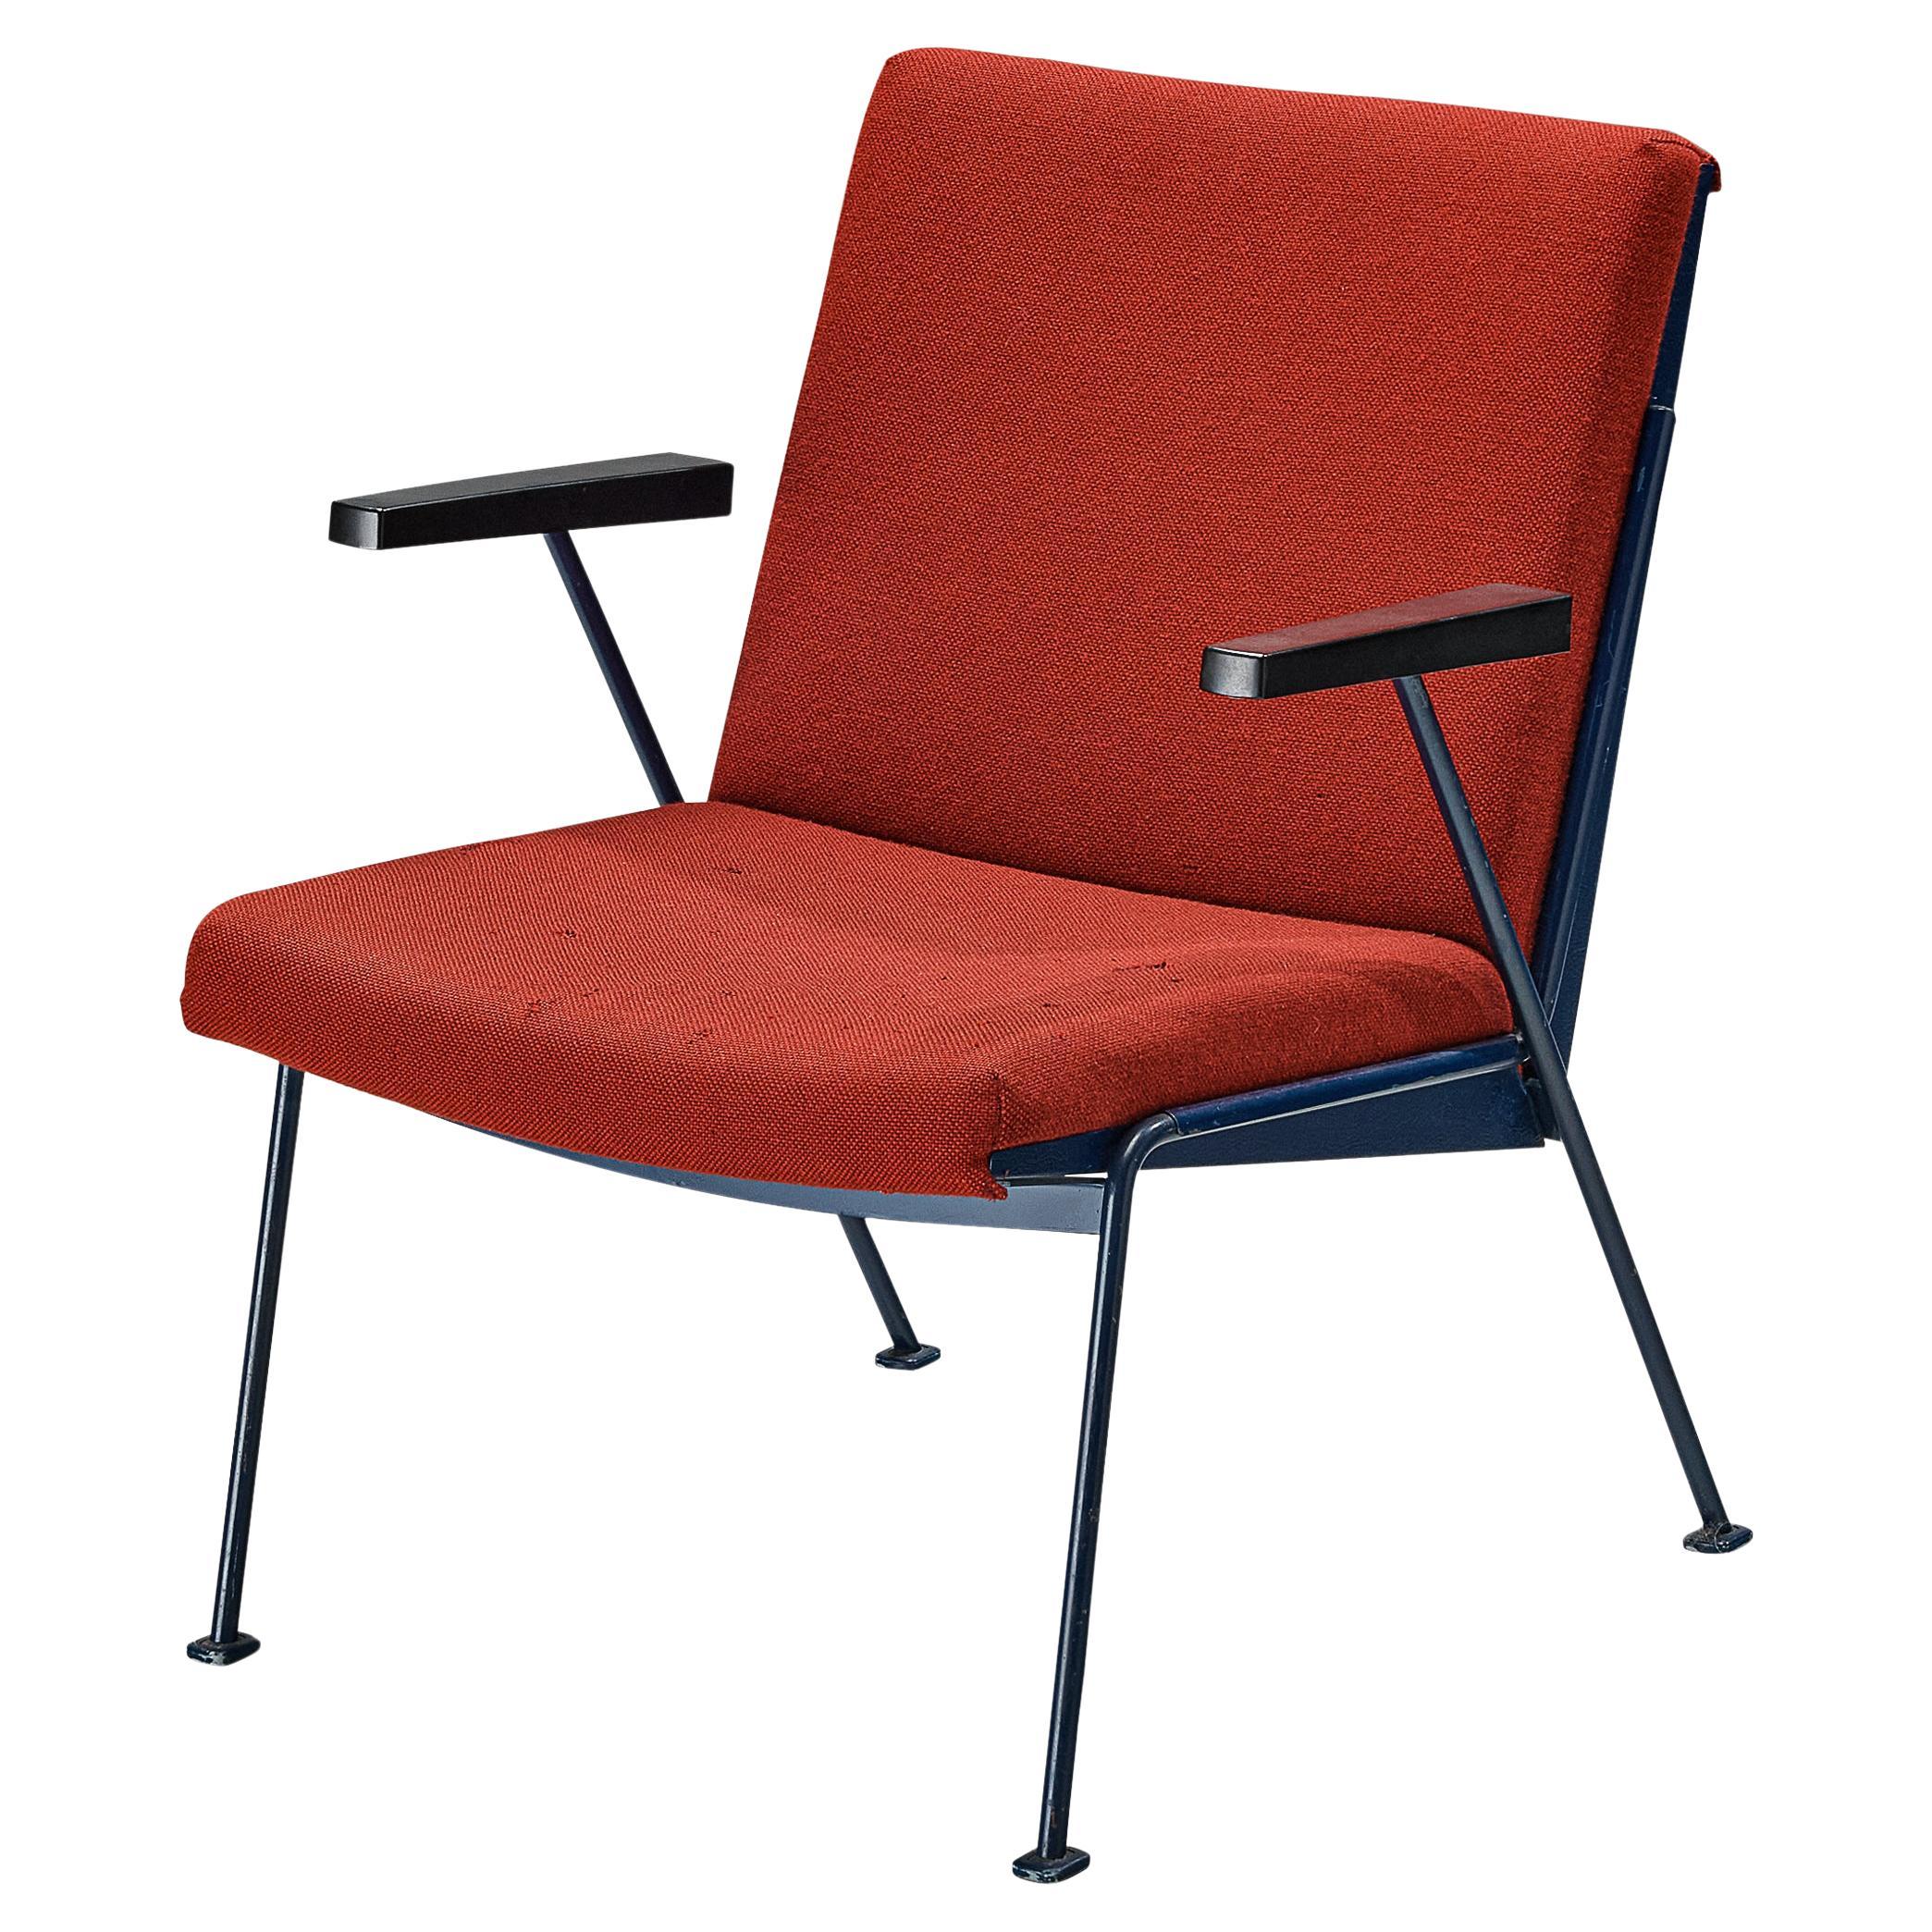 Wim Rietveld for Ahrend De Cirkel 'Oase' Lounge Chair in Red Upholstery